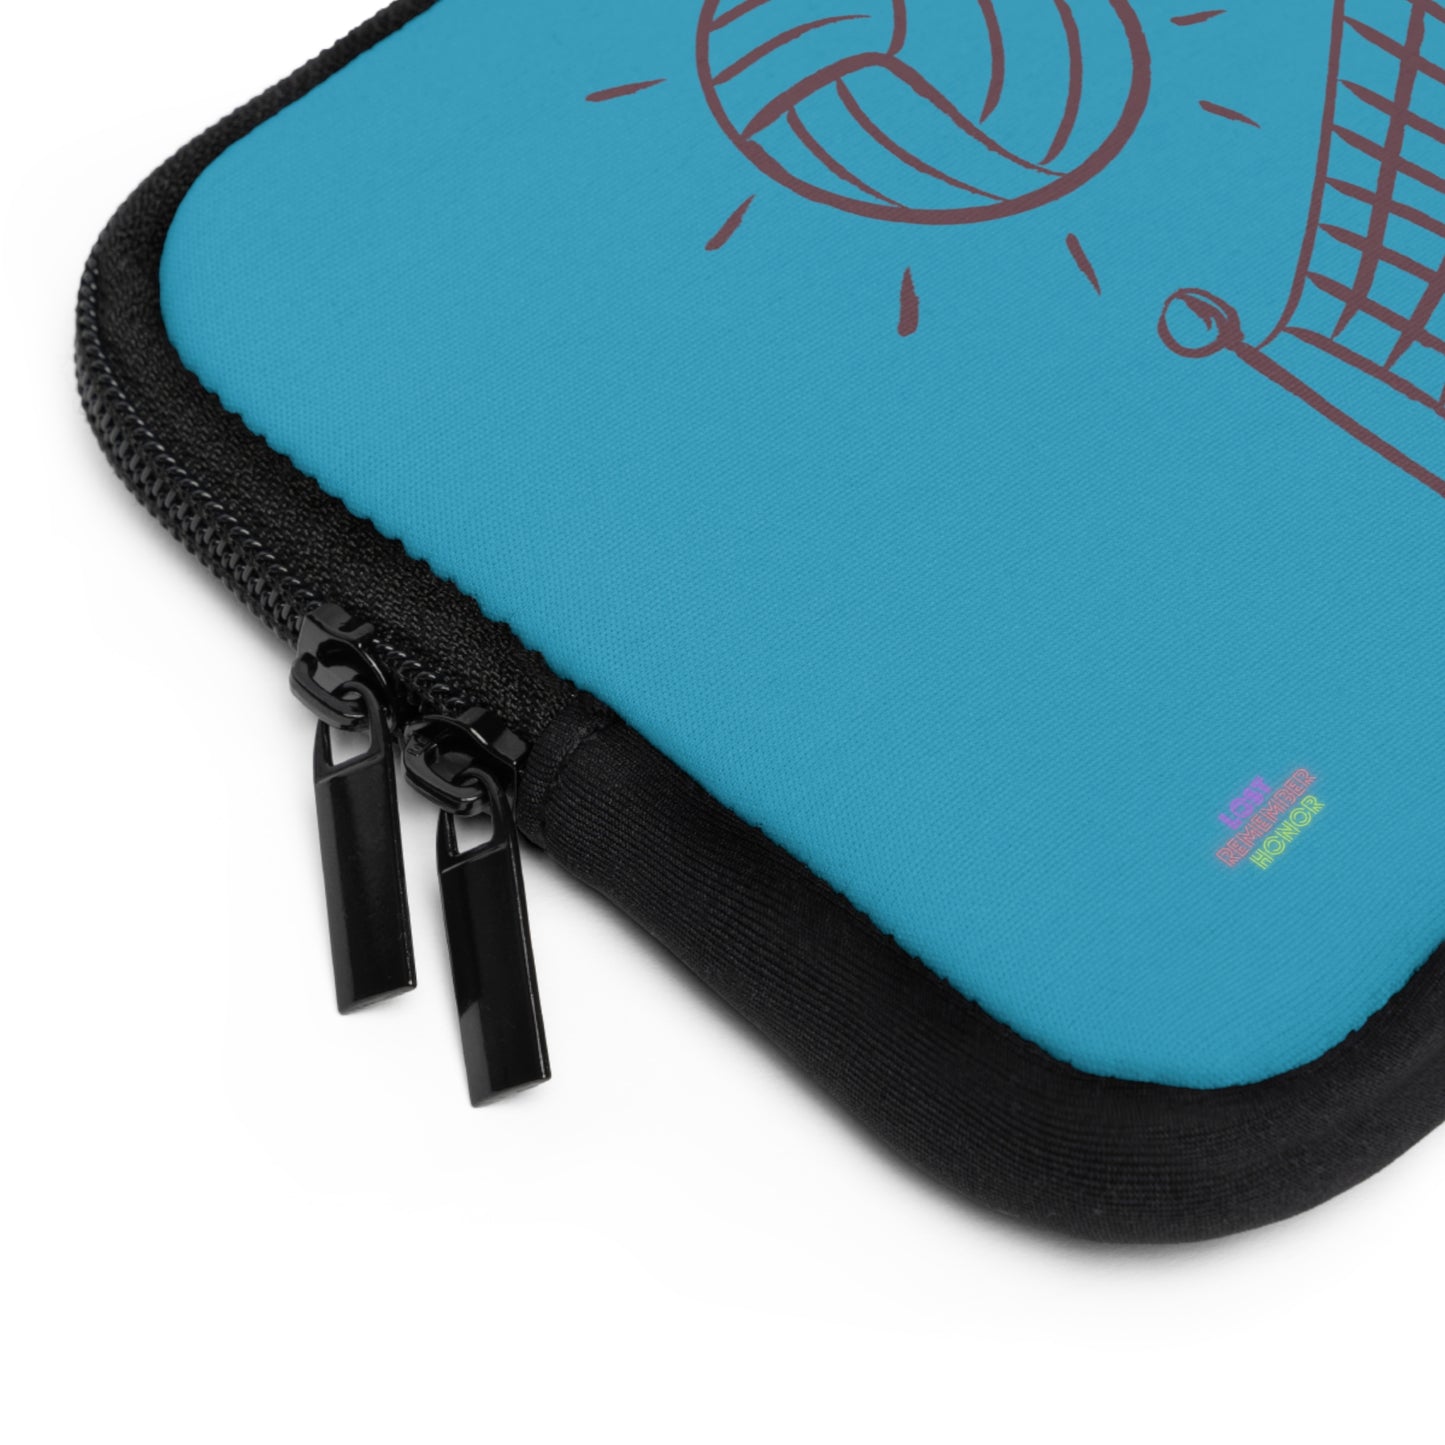 Laptop Sleeve: Volleyball Turquoise